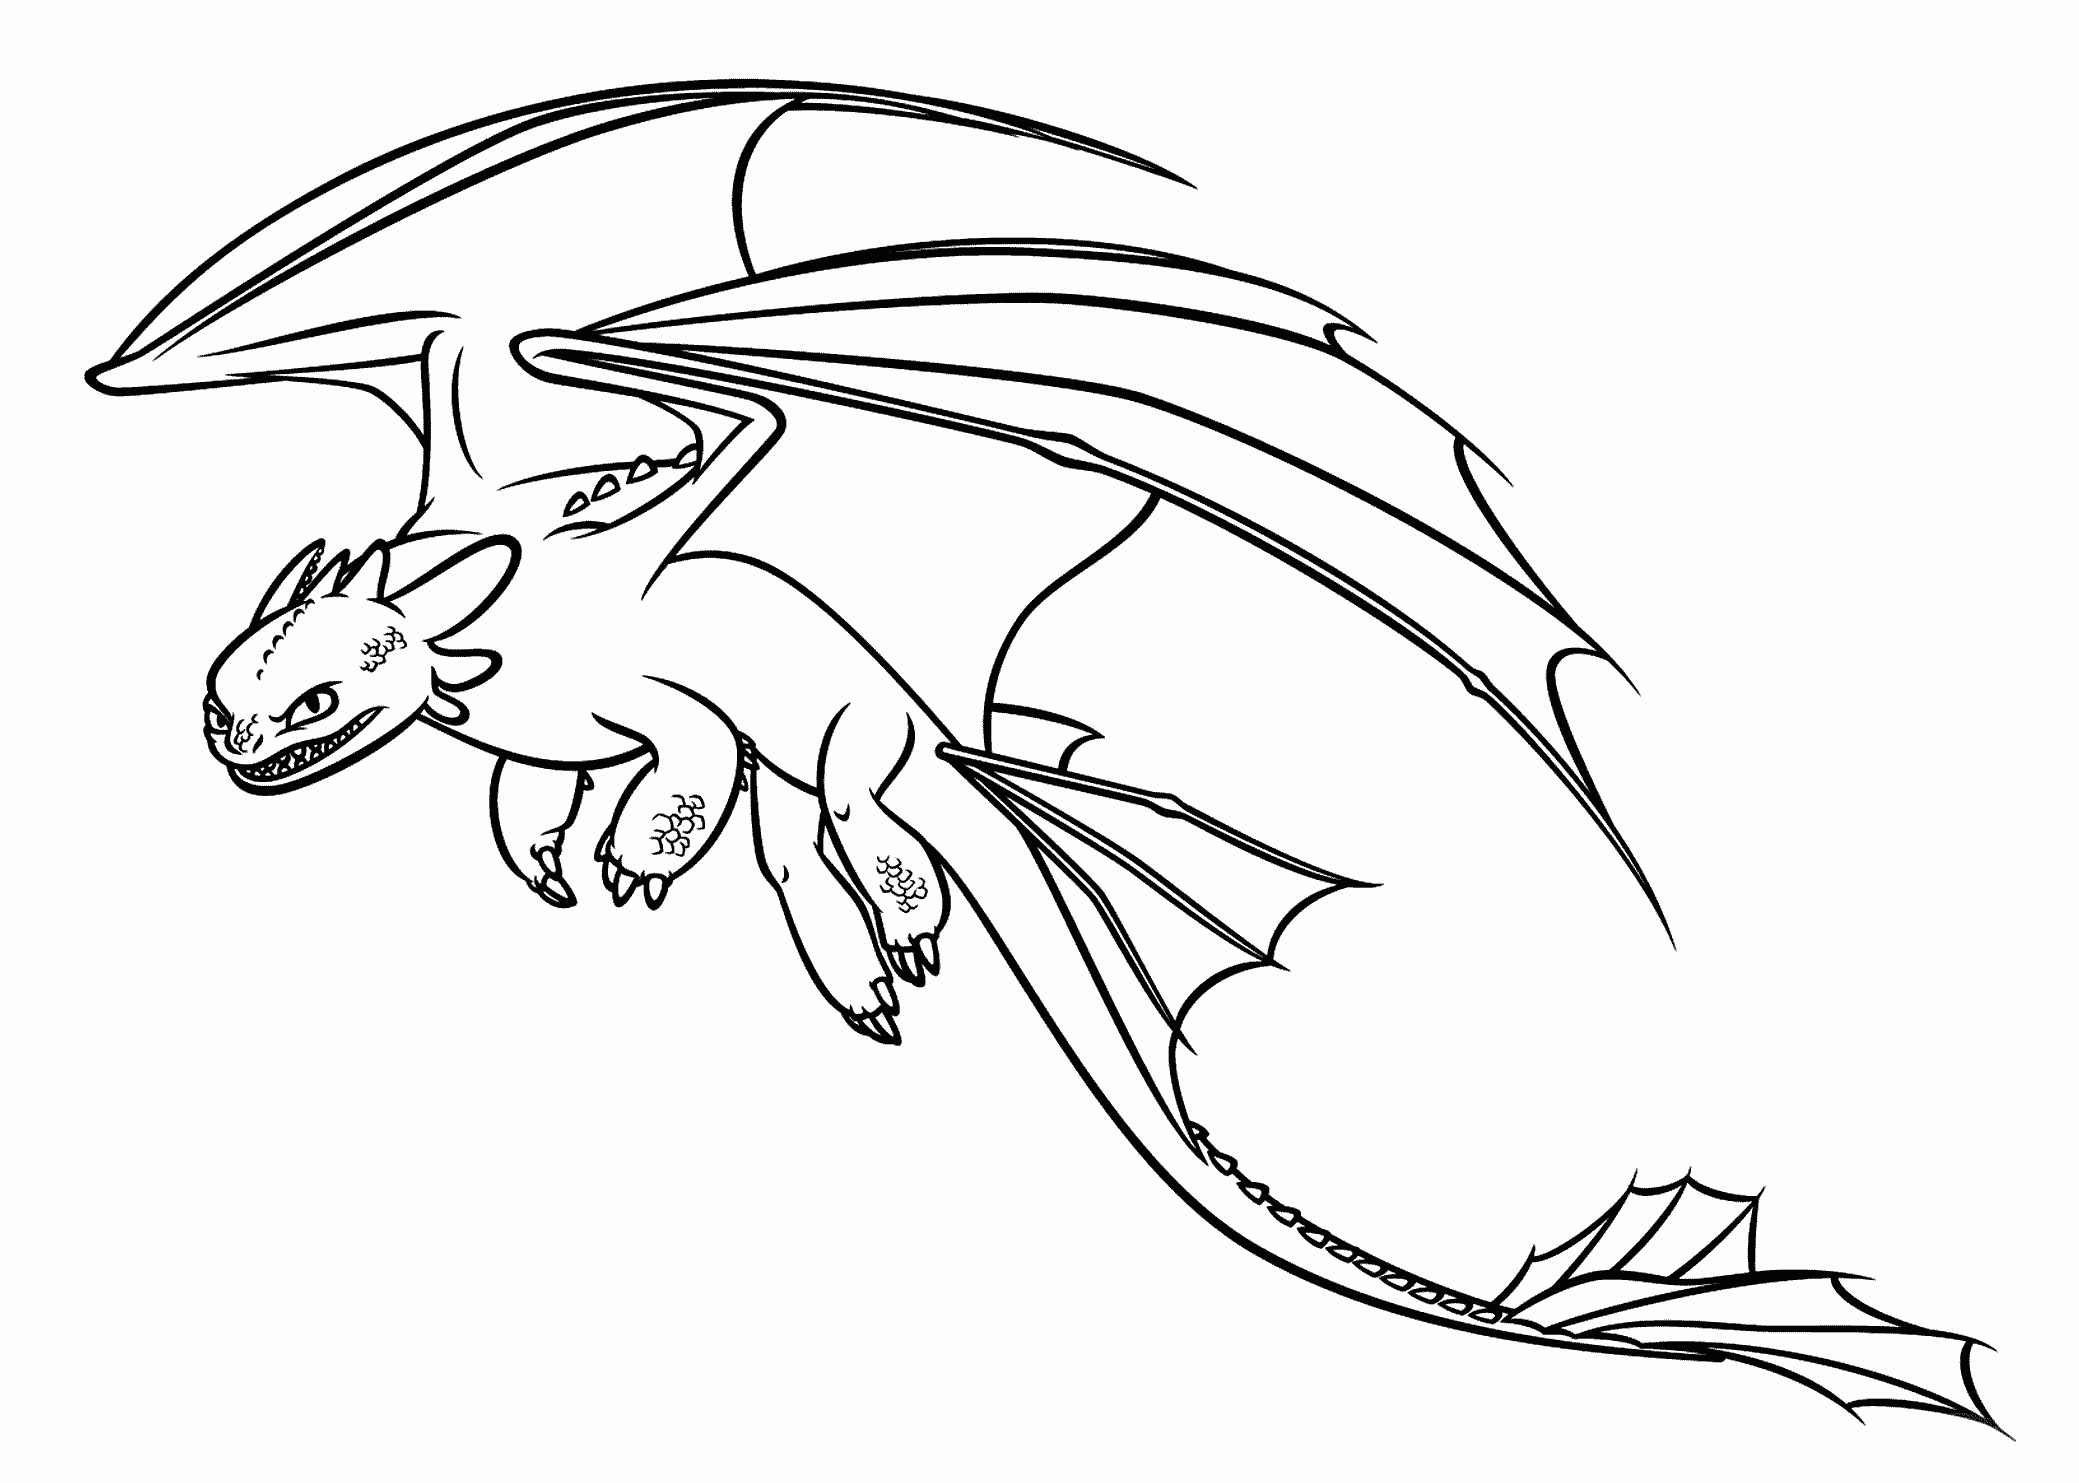 Shape How To Train Your Dragon Coloring Pages Getcoloringpages ...